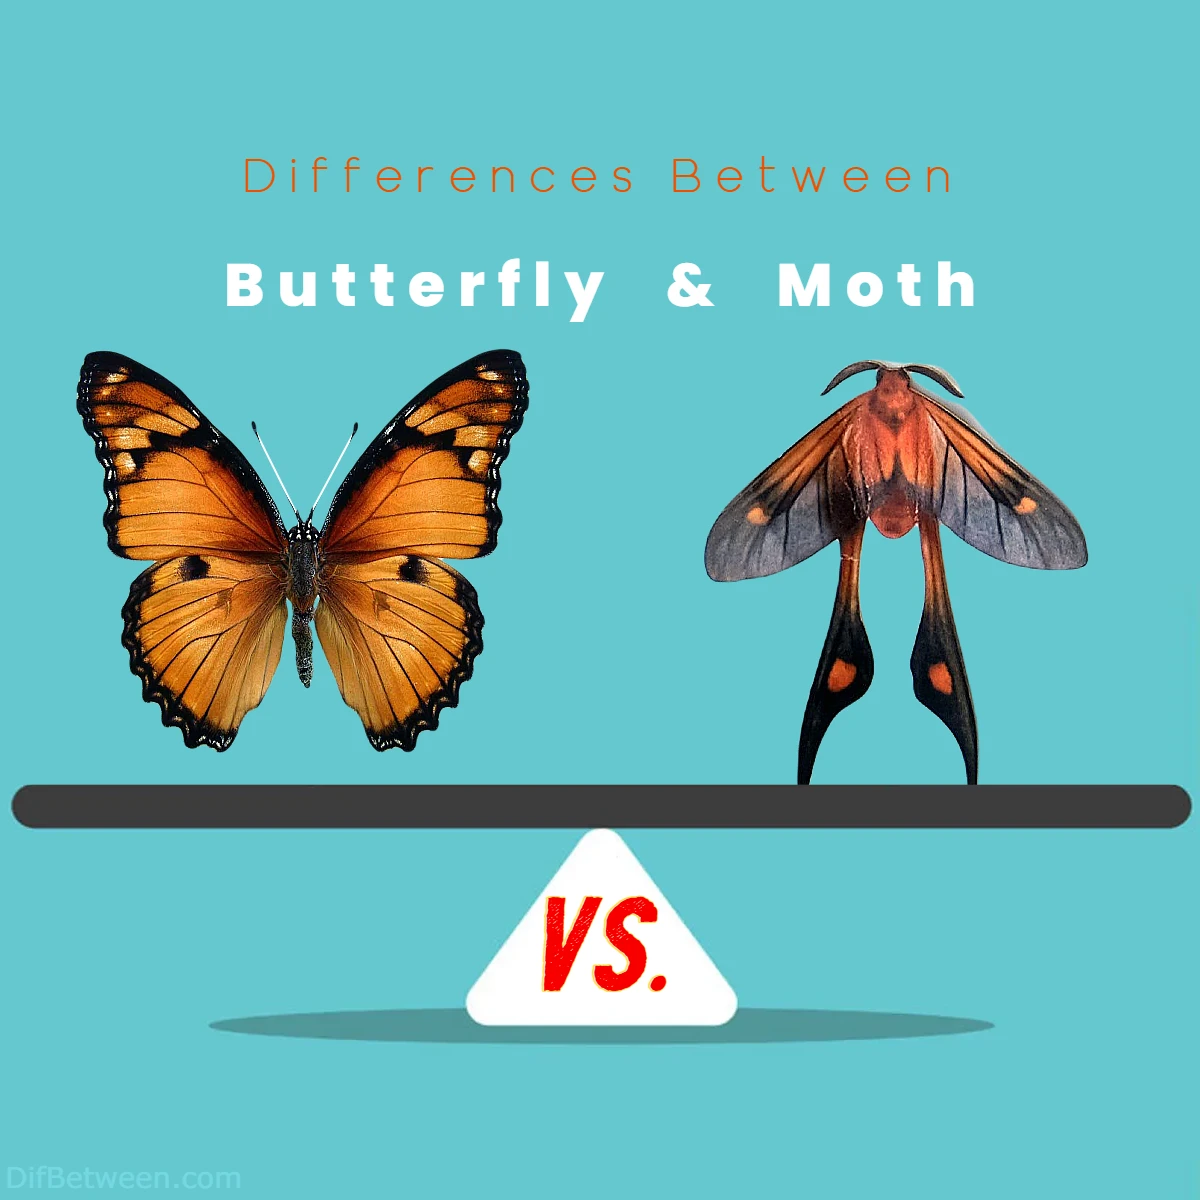 Differences Between Butterfly vs Moth